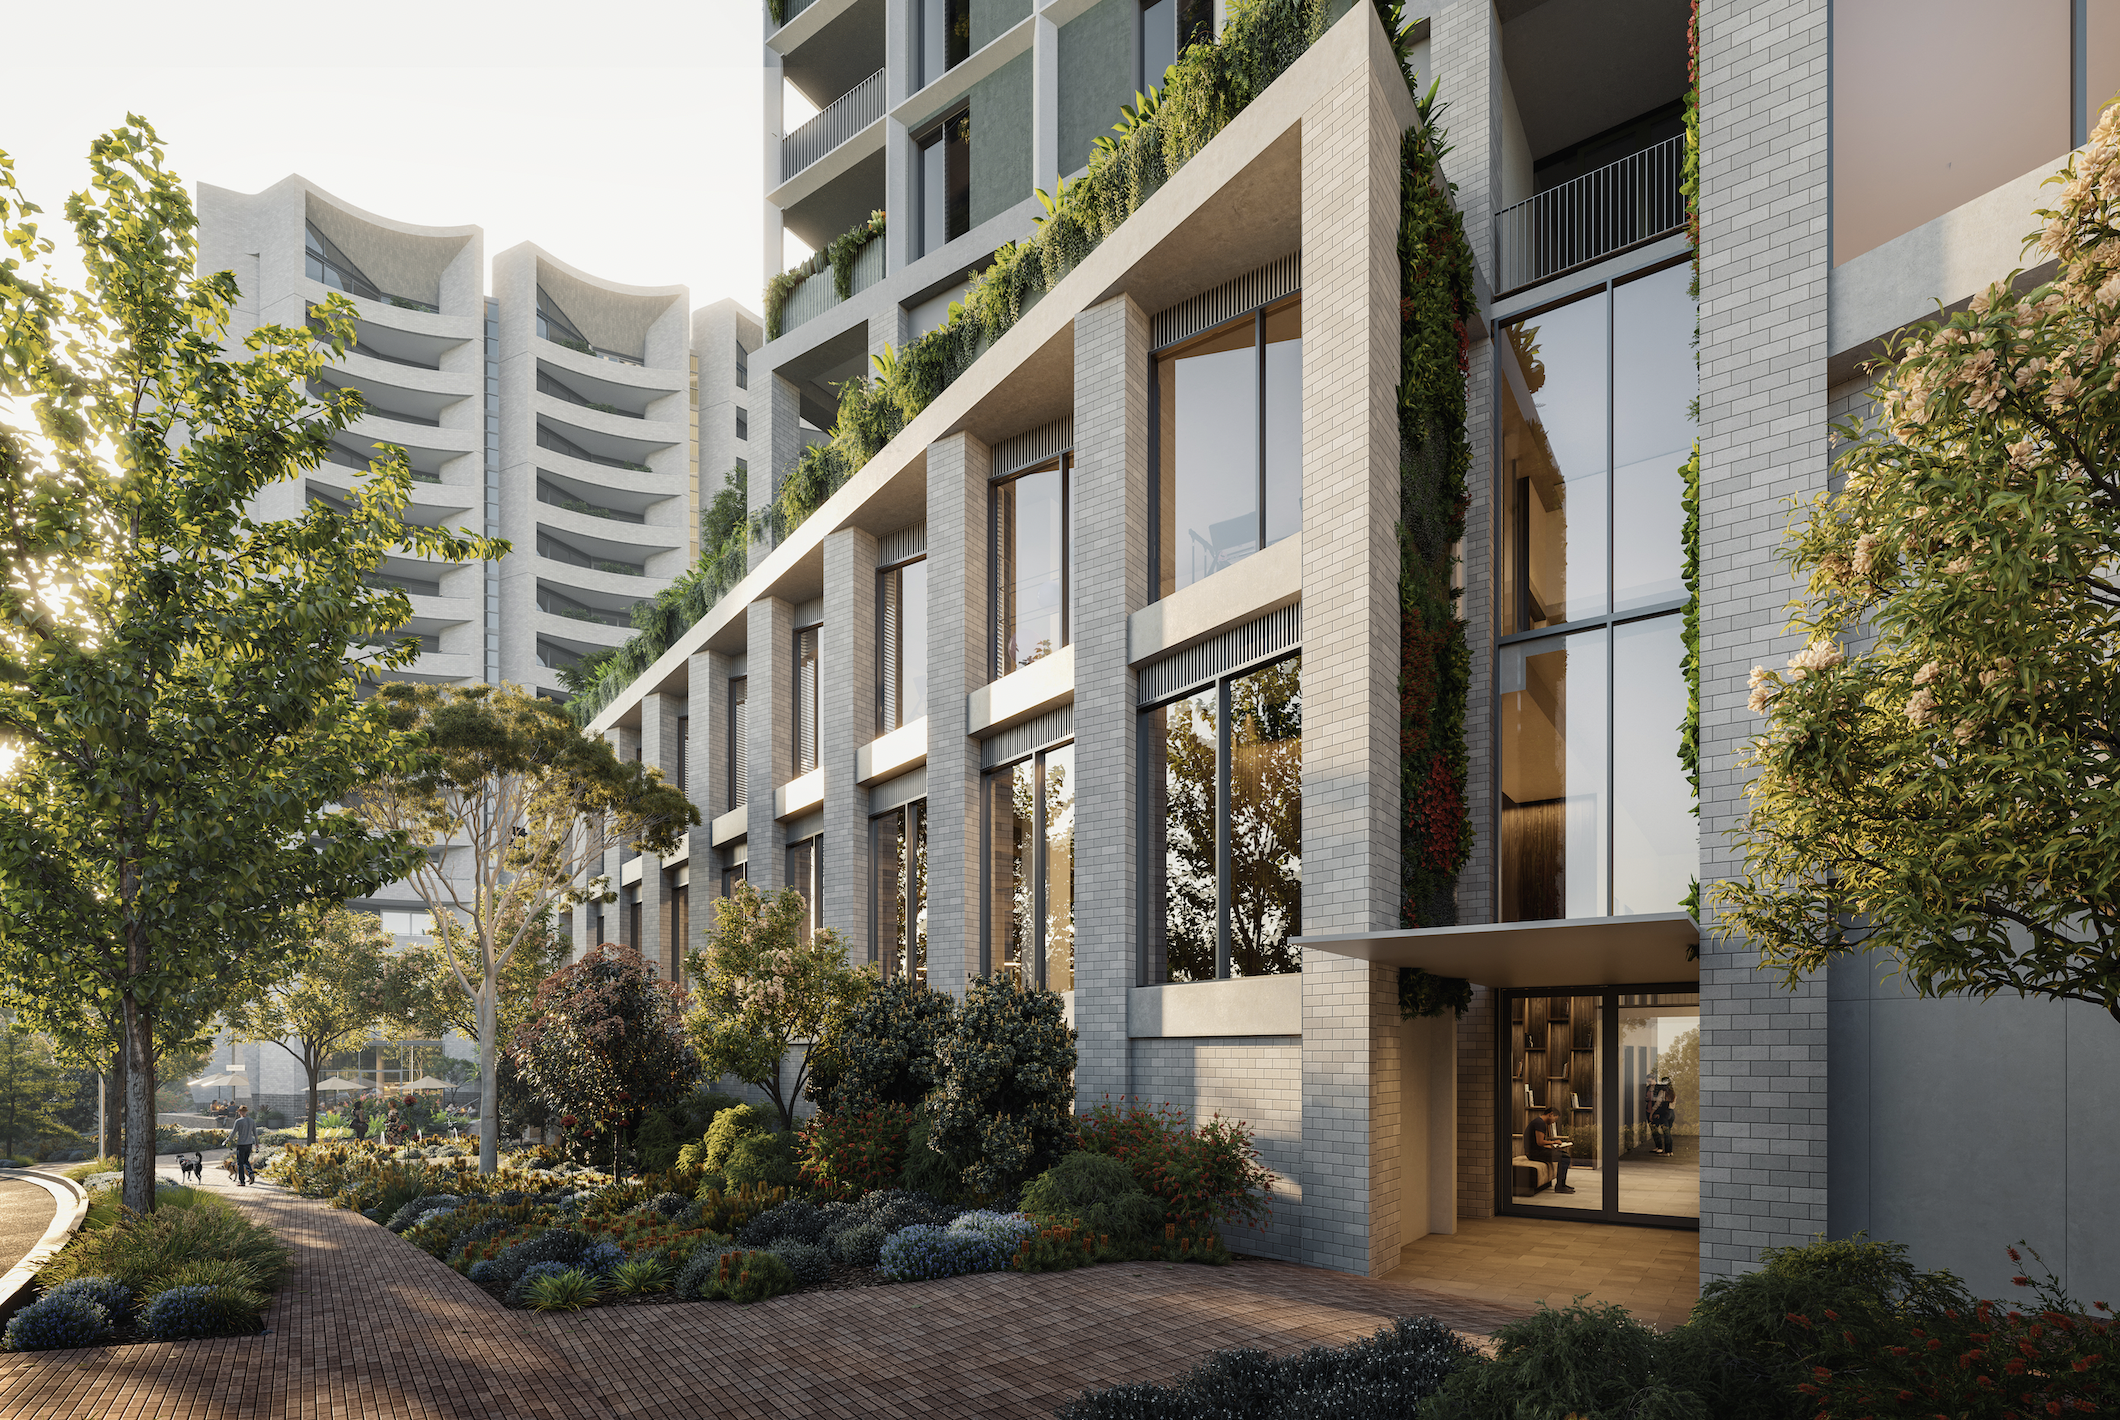 Norwest Quarter will consist of eight residential towers providing housing for more than 2,000 residents. Image: Artist's impression